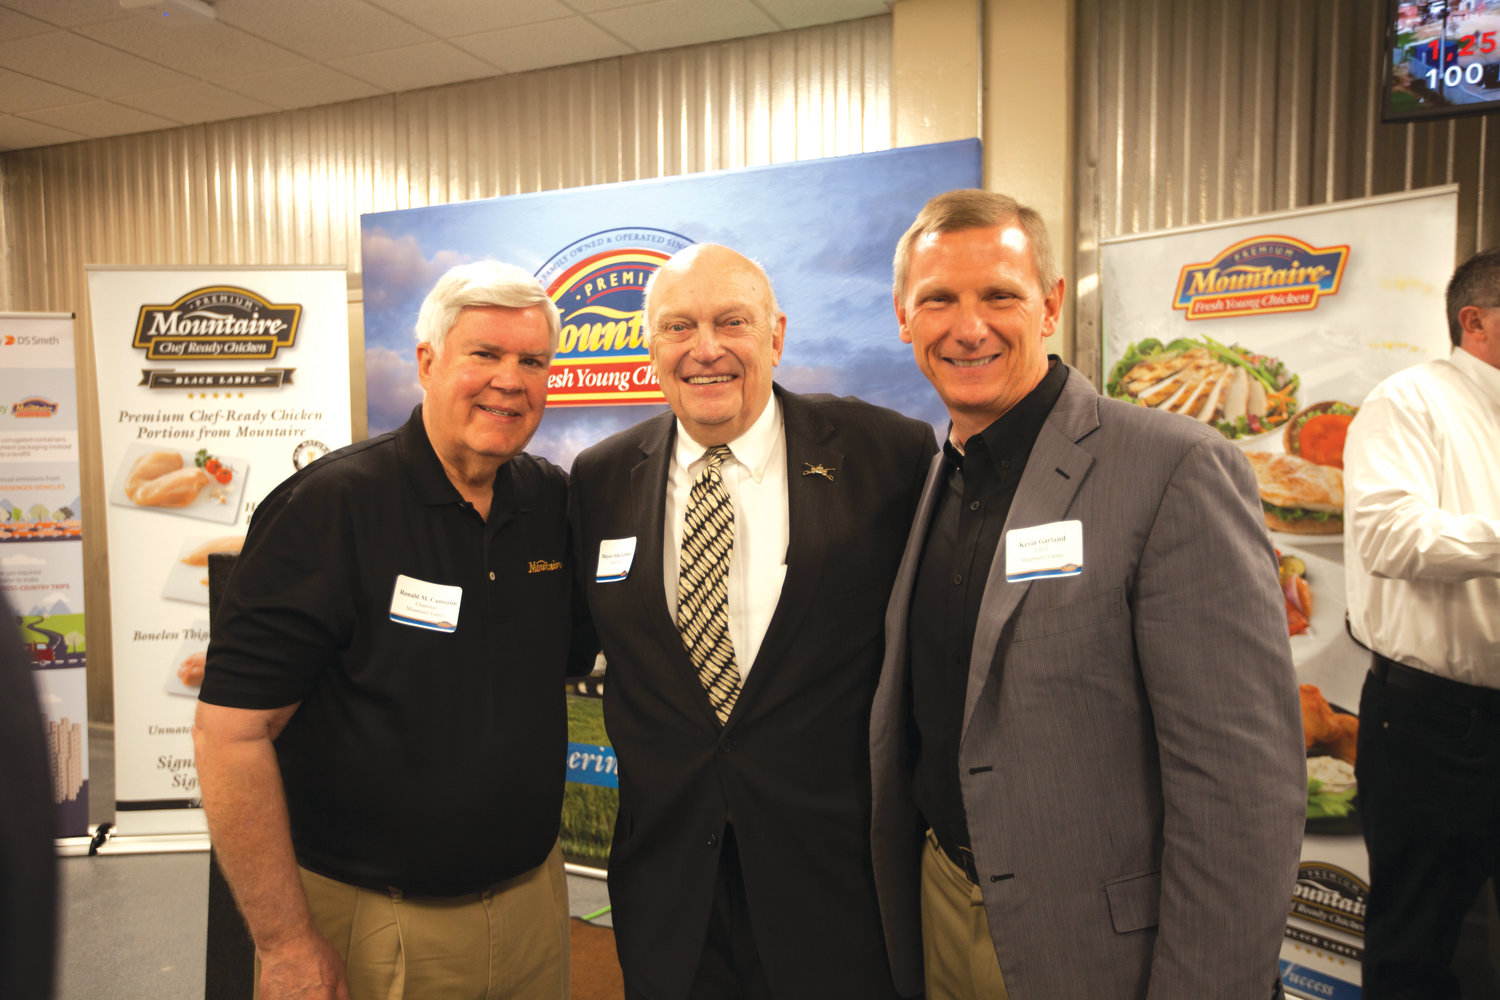 Chairman of Mountaire Farms Ronnie Cameron, left, with Siler City Mayor John Grimes and Mountaire Farms CEO Kevin Garland.